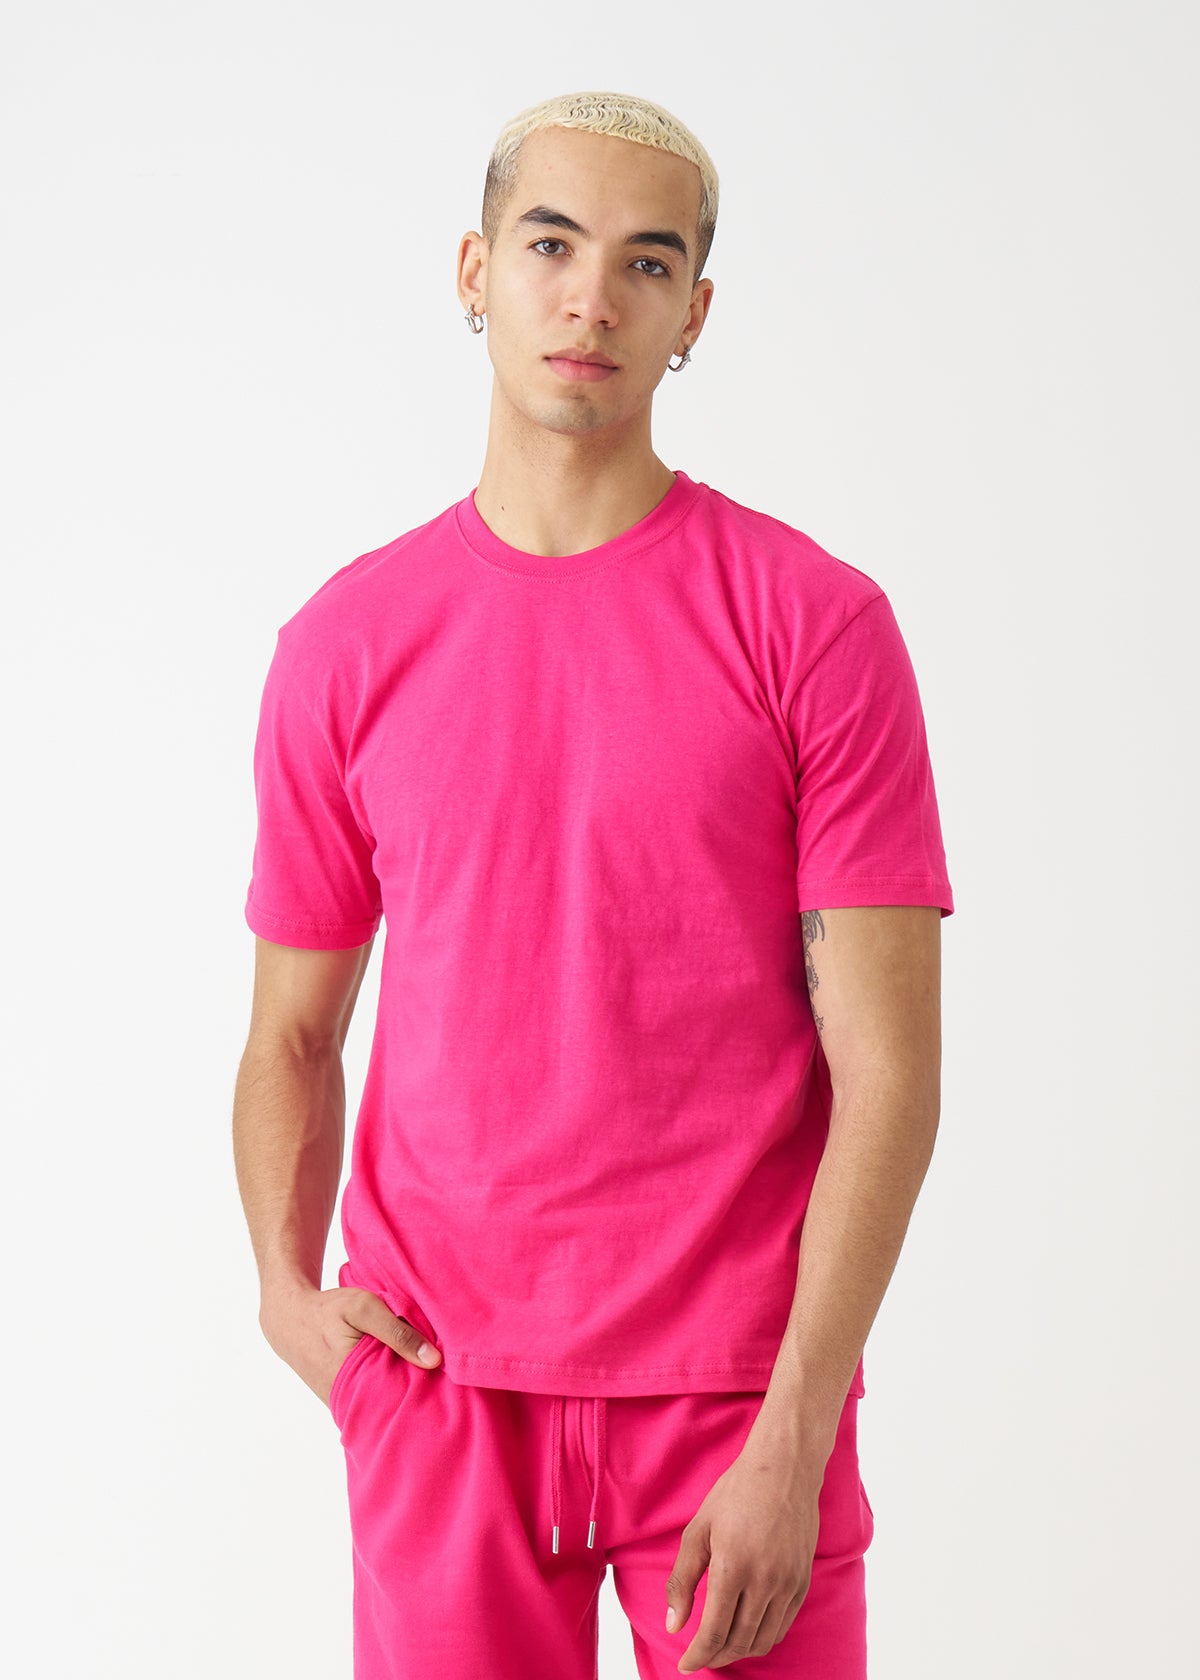 Hot Pink Combed Cotton T-Shirt